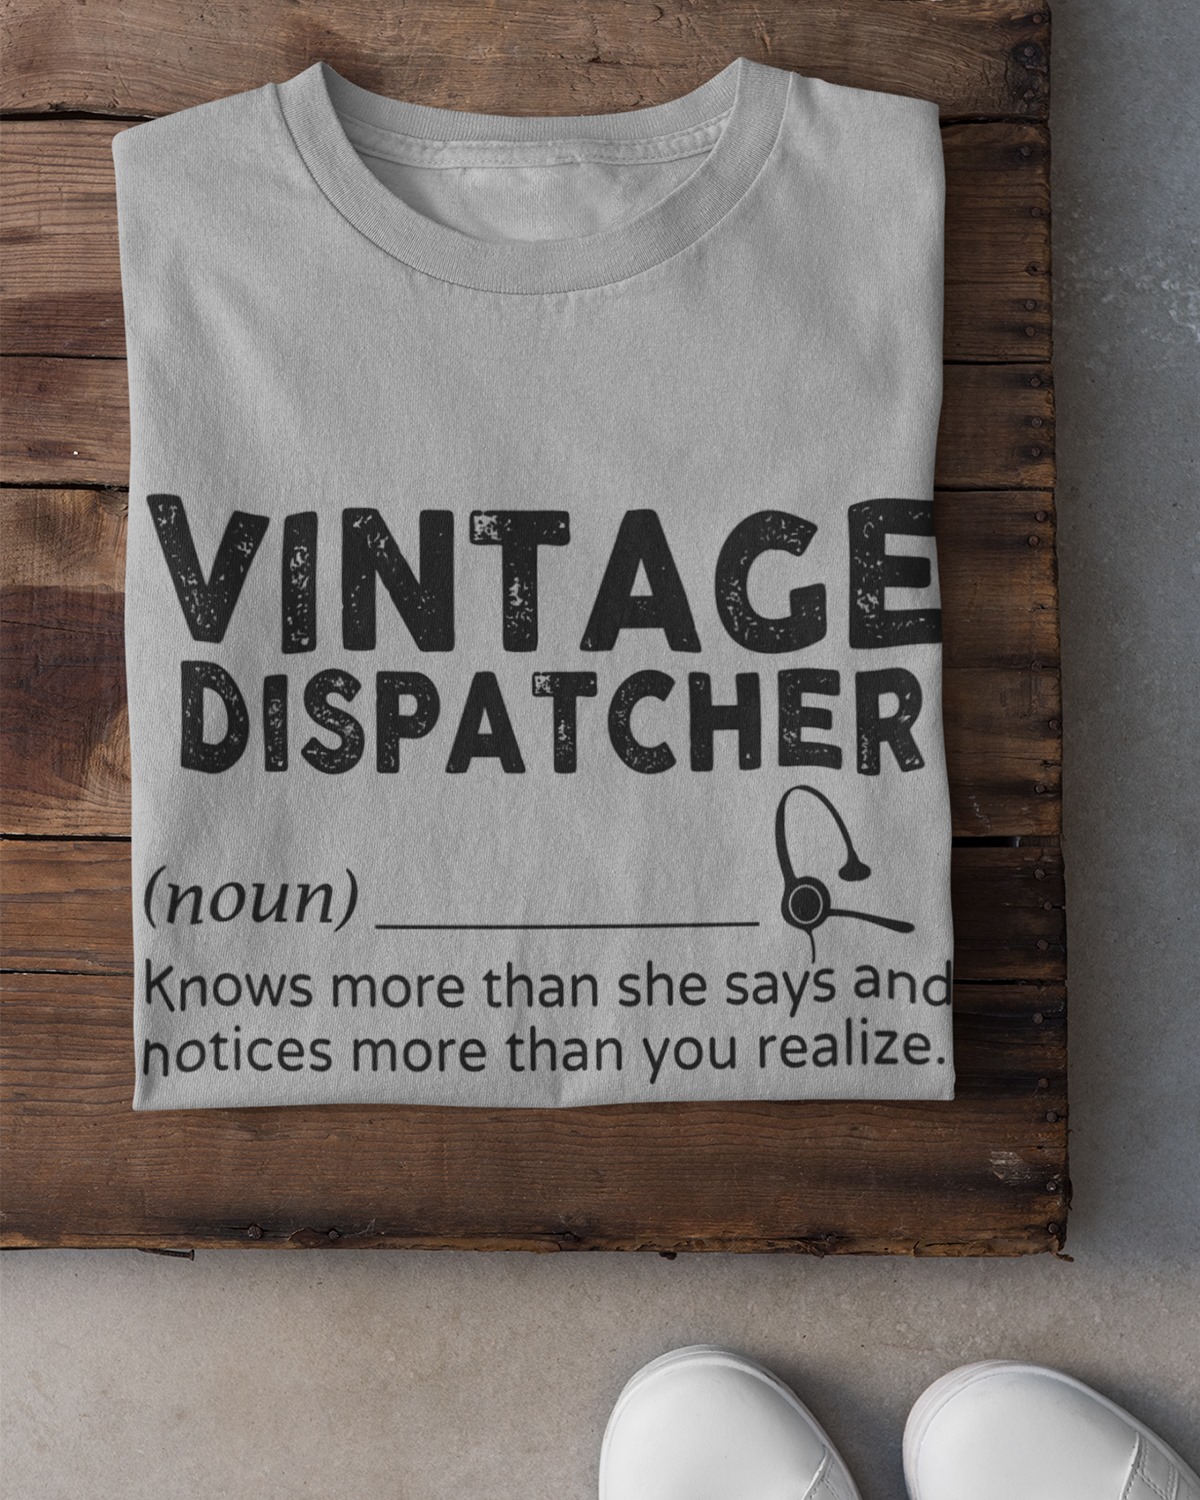 Vintage dispatcher knows more than she says and notices more than you realize